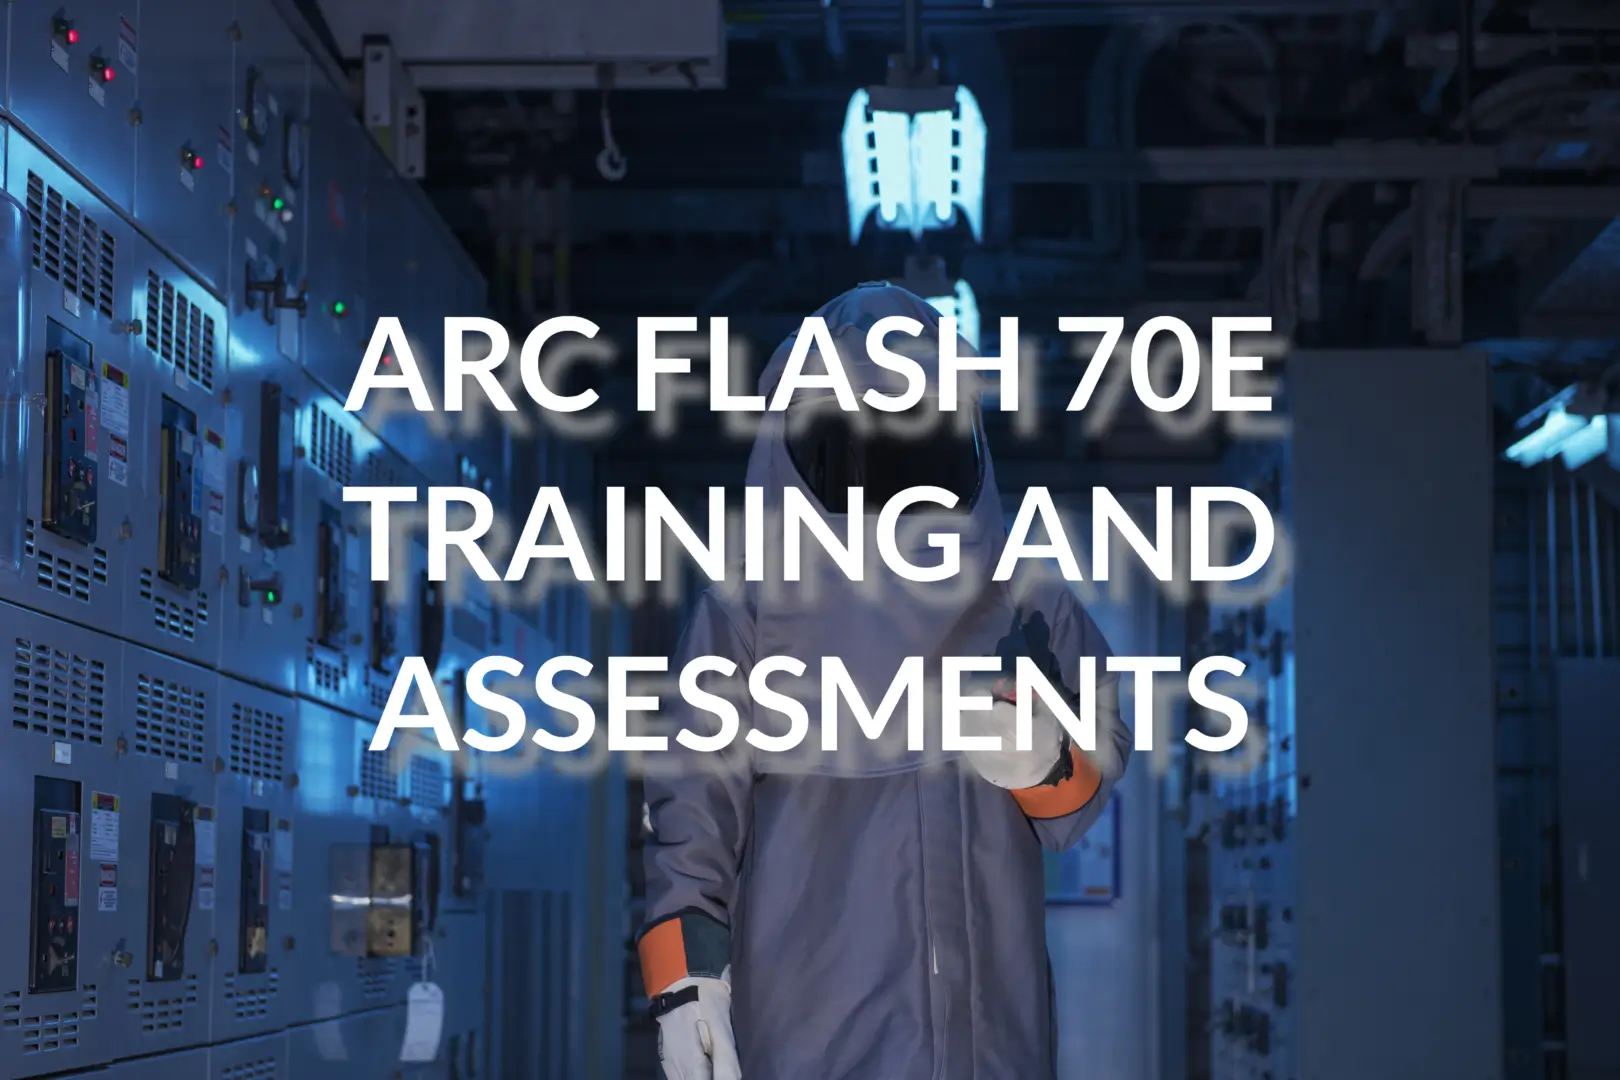 ARC FLASH 70 E TRAINING AND ASSESSMENTS